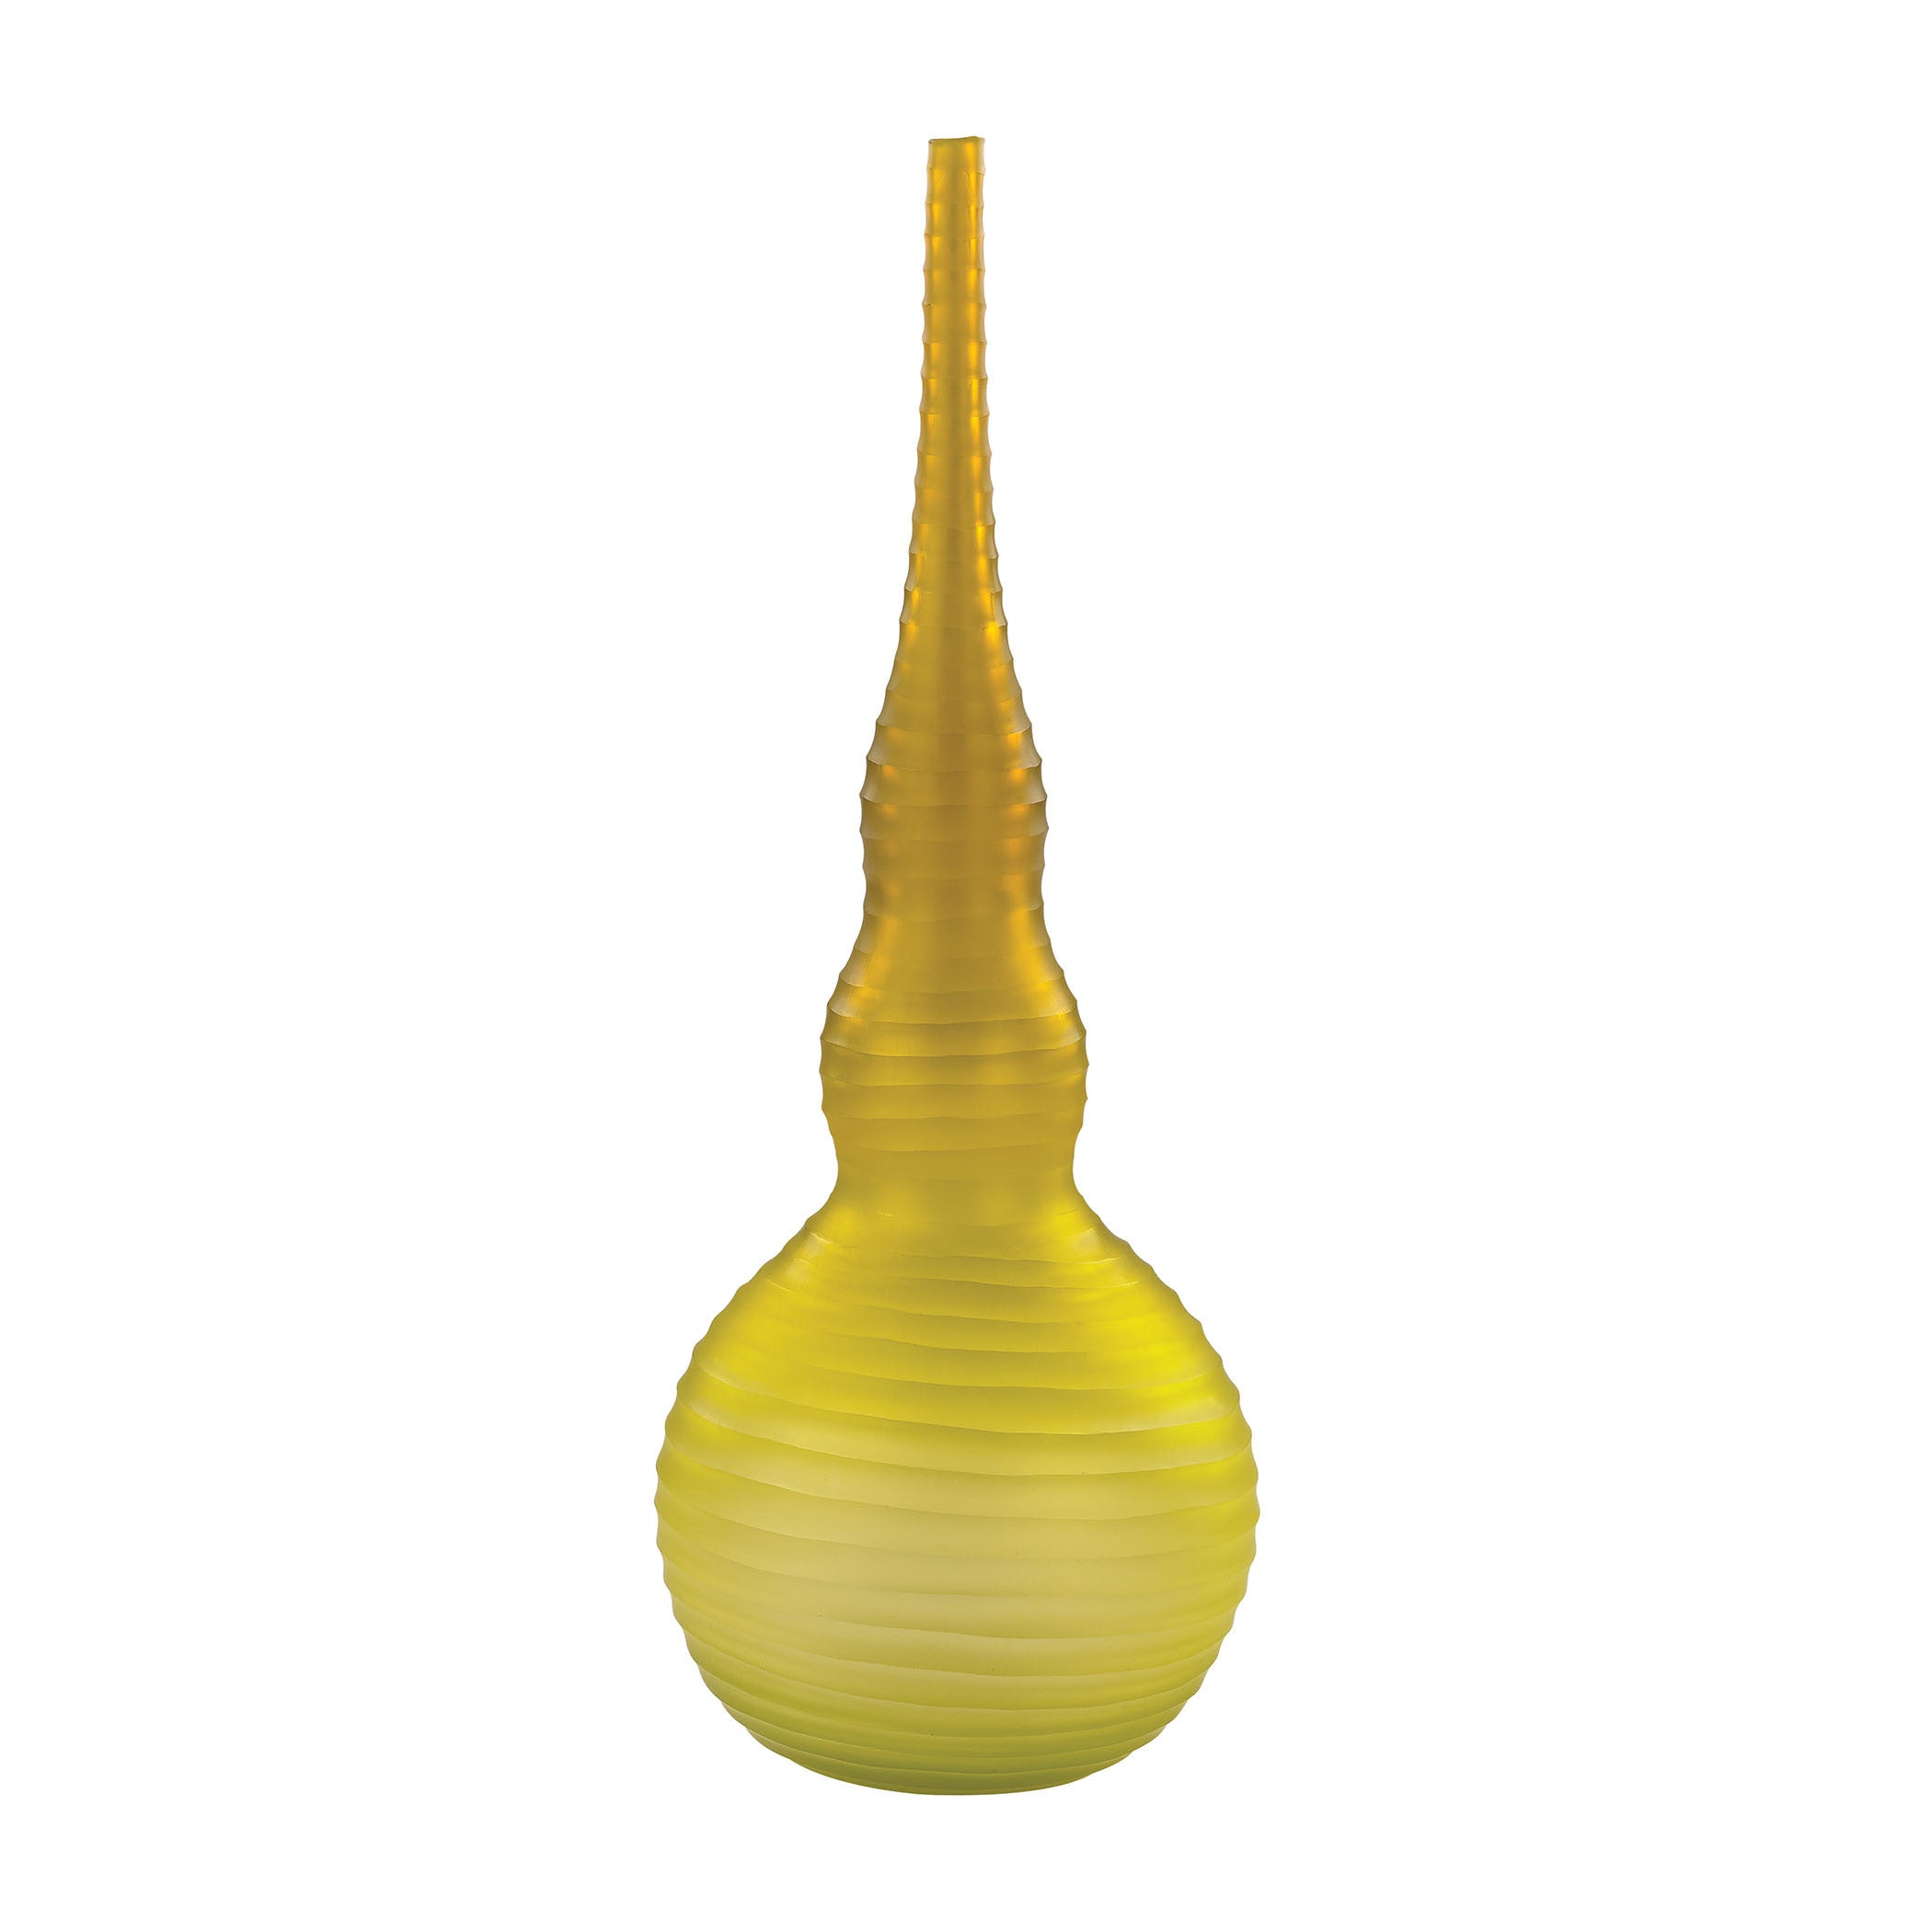 Guildmaster Gui-4154-034 Whorl Collection Amber,green Finish Finial